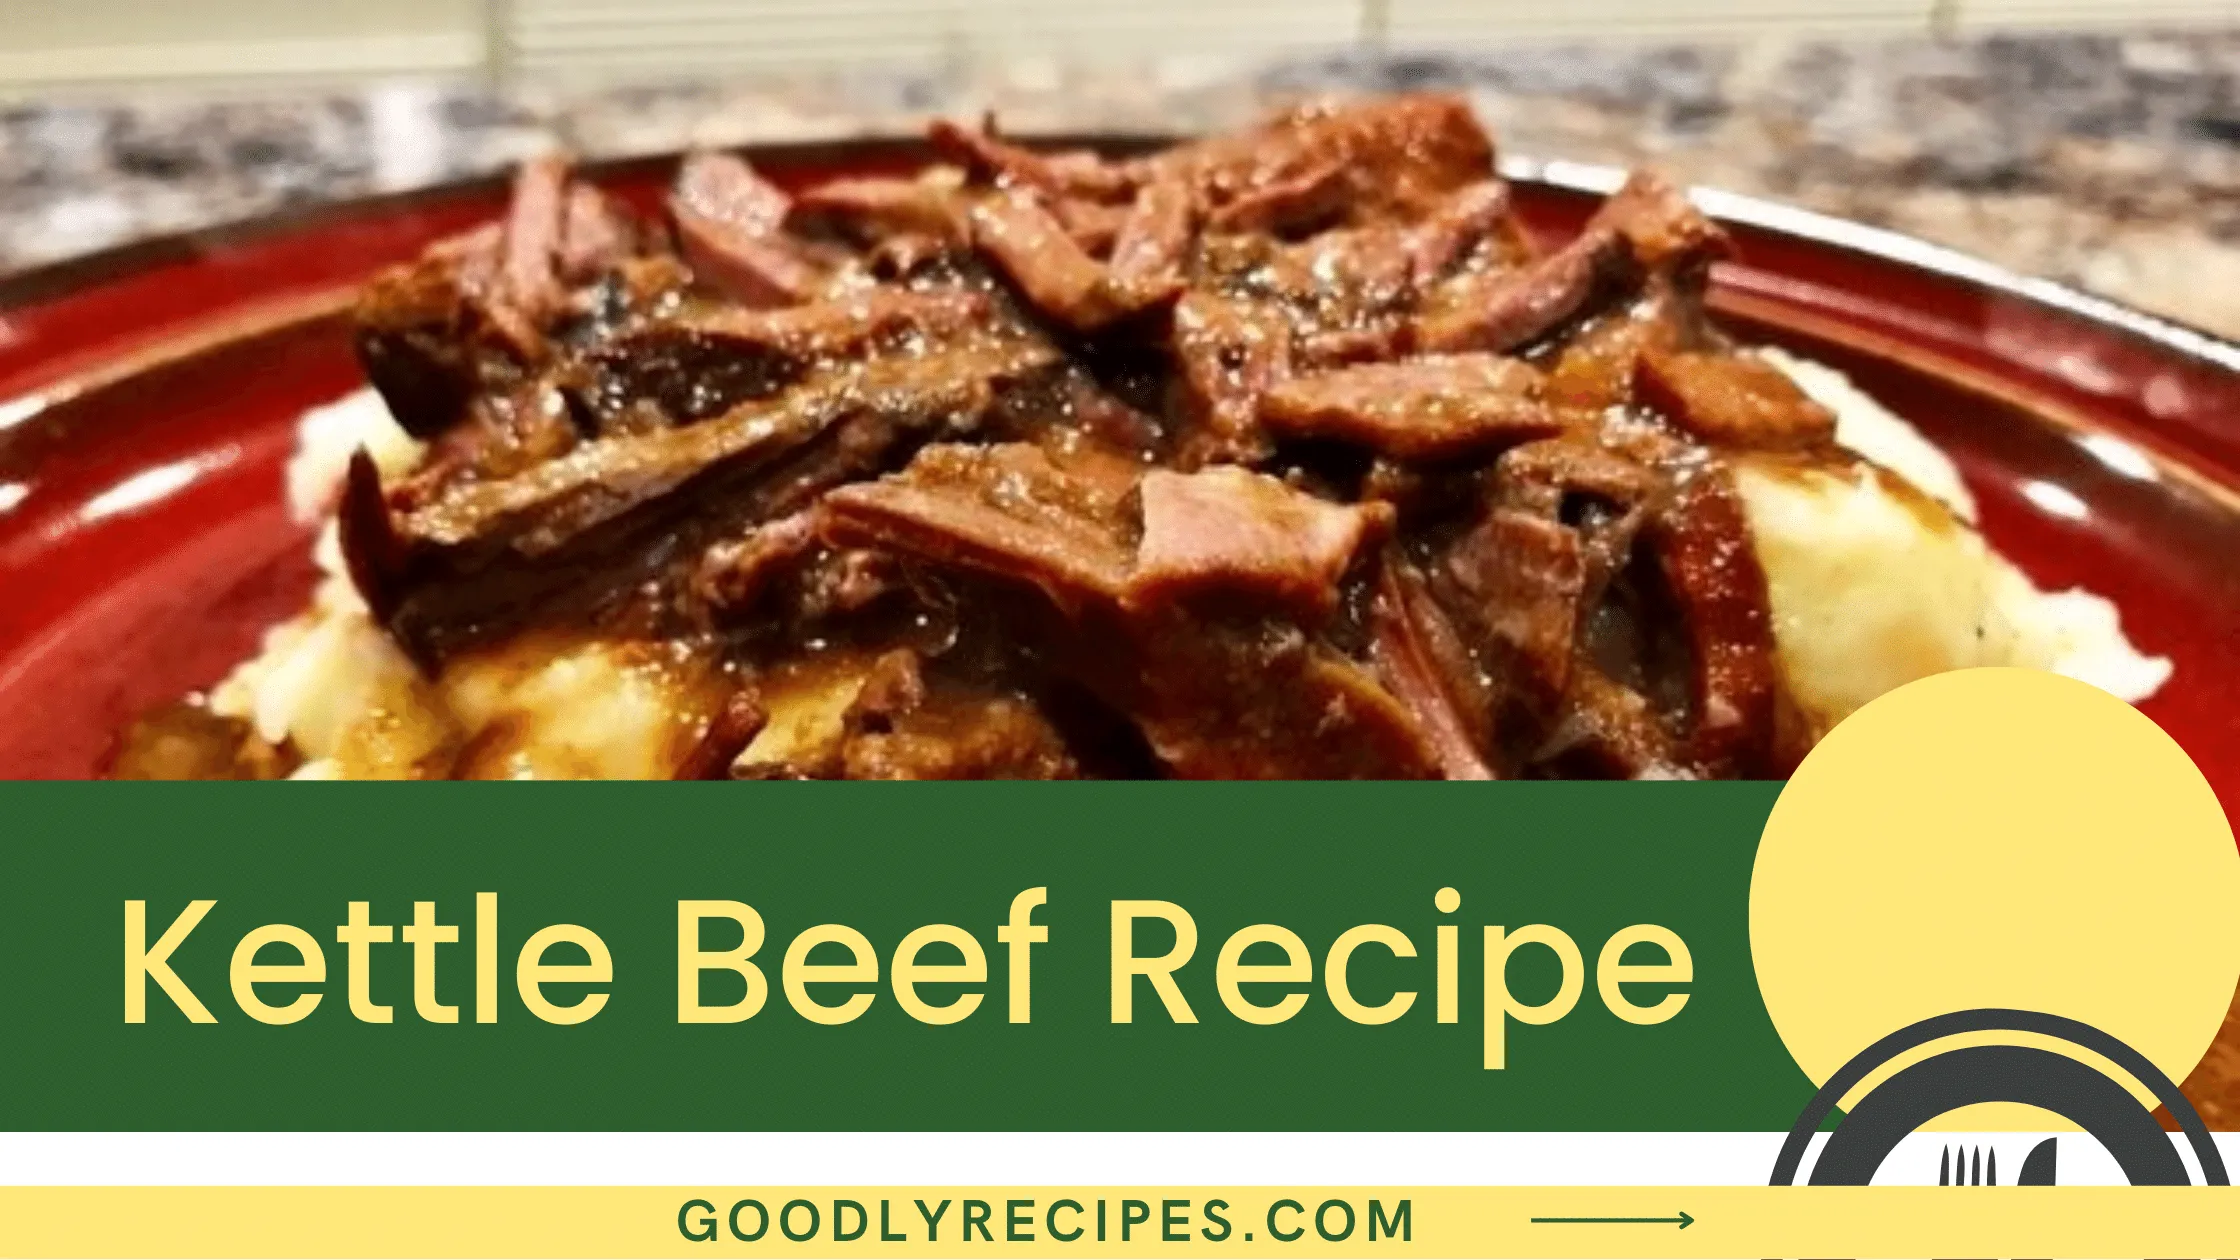 Kettle Beef Recipe - For Food Lovers